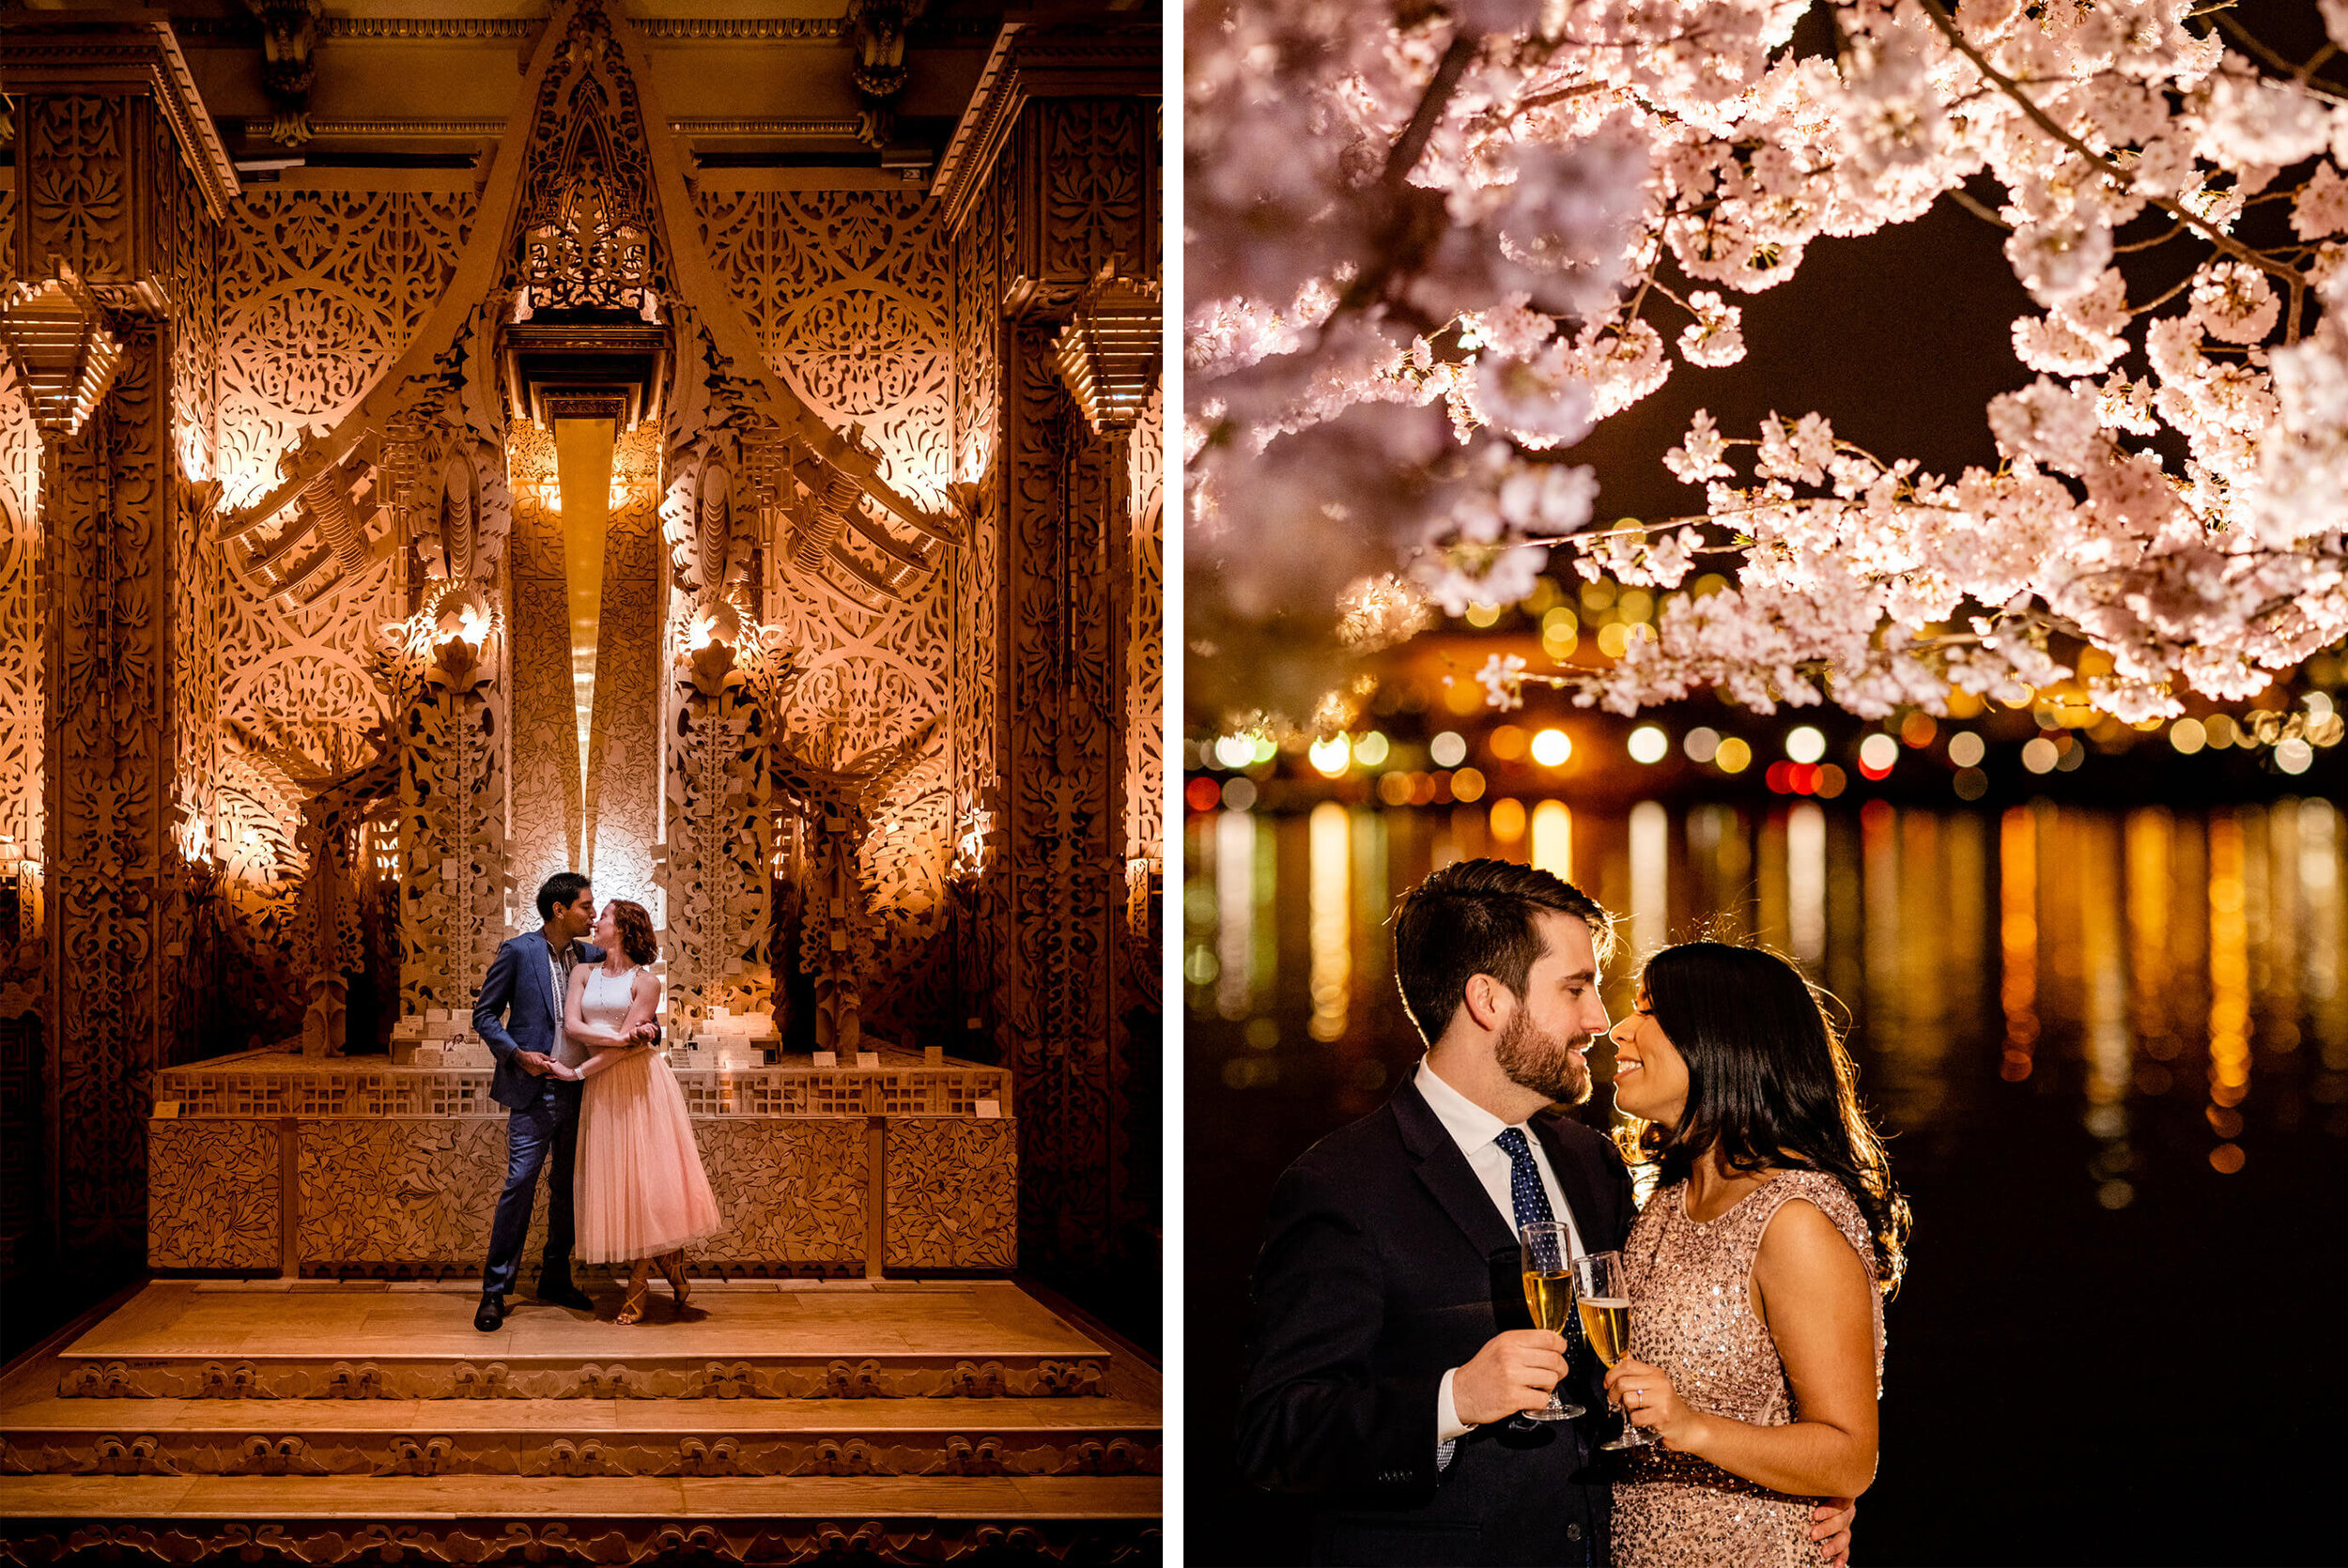 renwick-gallery-engagement-session-dancer-couple-cherry-blossom-night-engagement-session-washington-dc-photography-by-bee-two-sweet.jpg